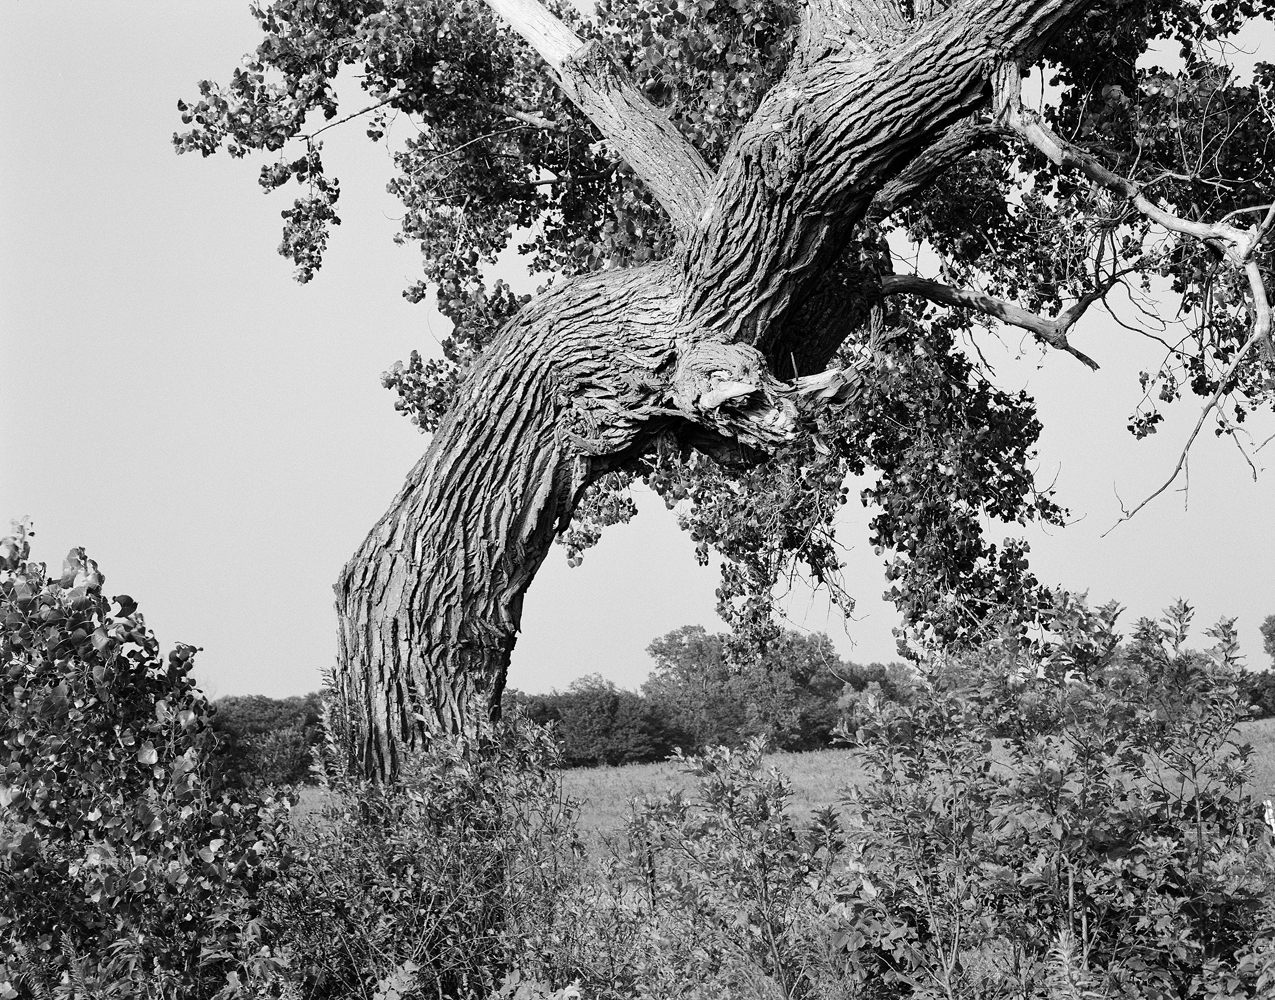 A crooked old tree, black and white image